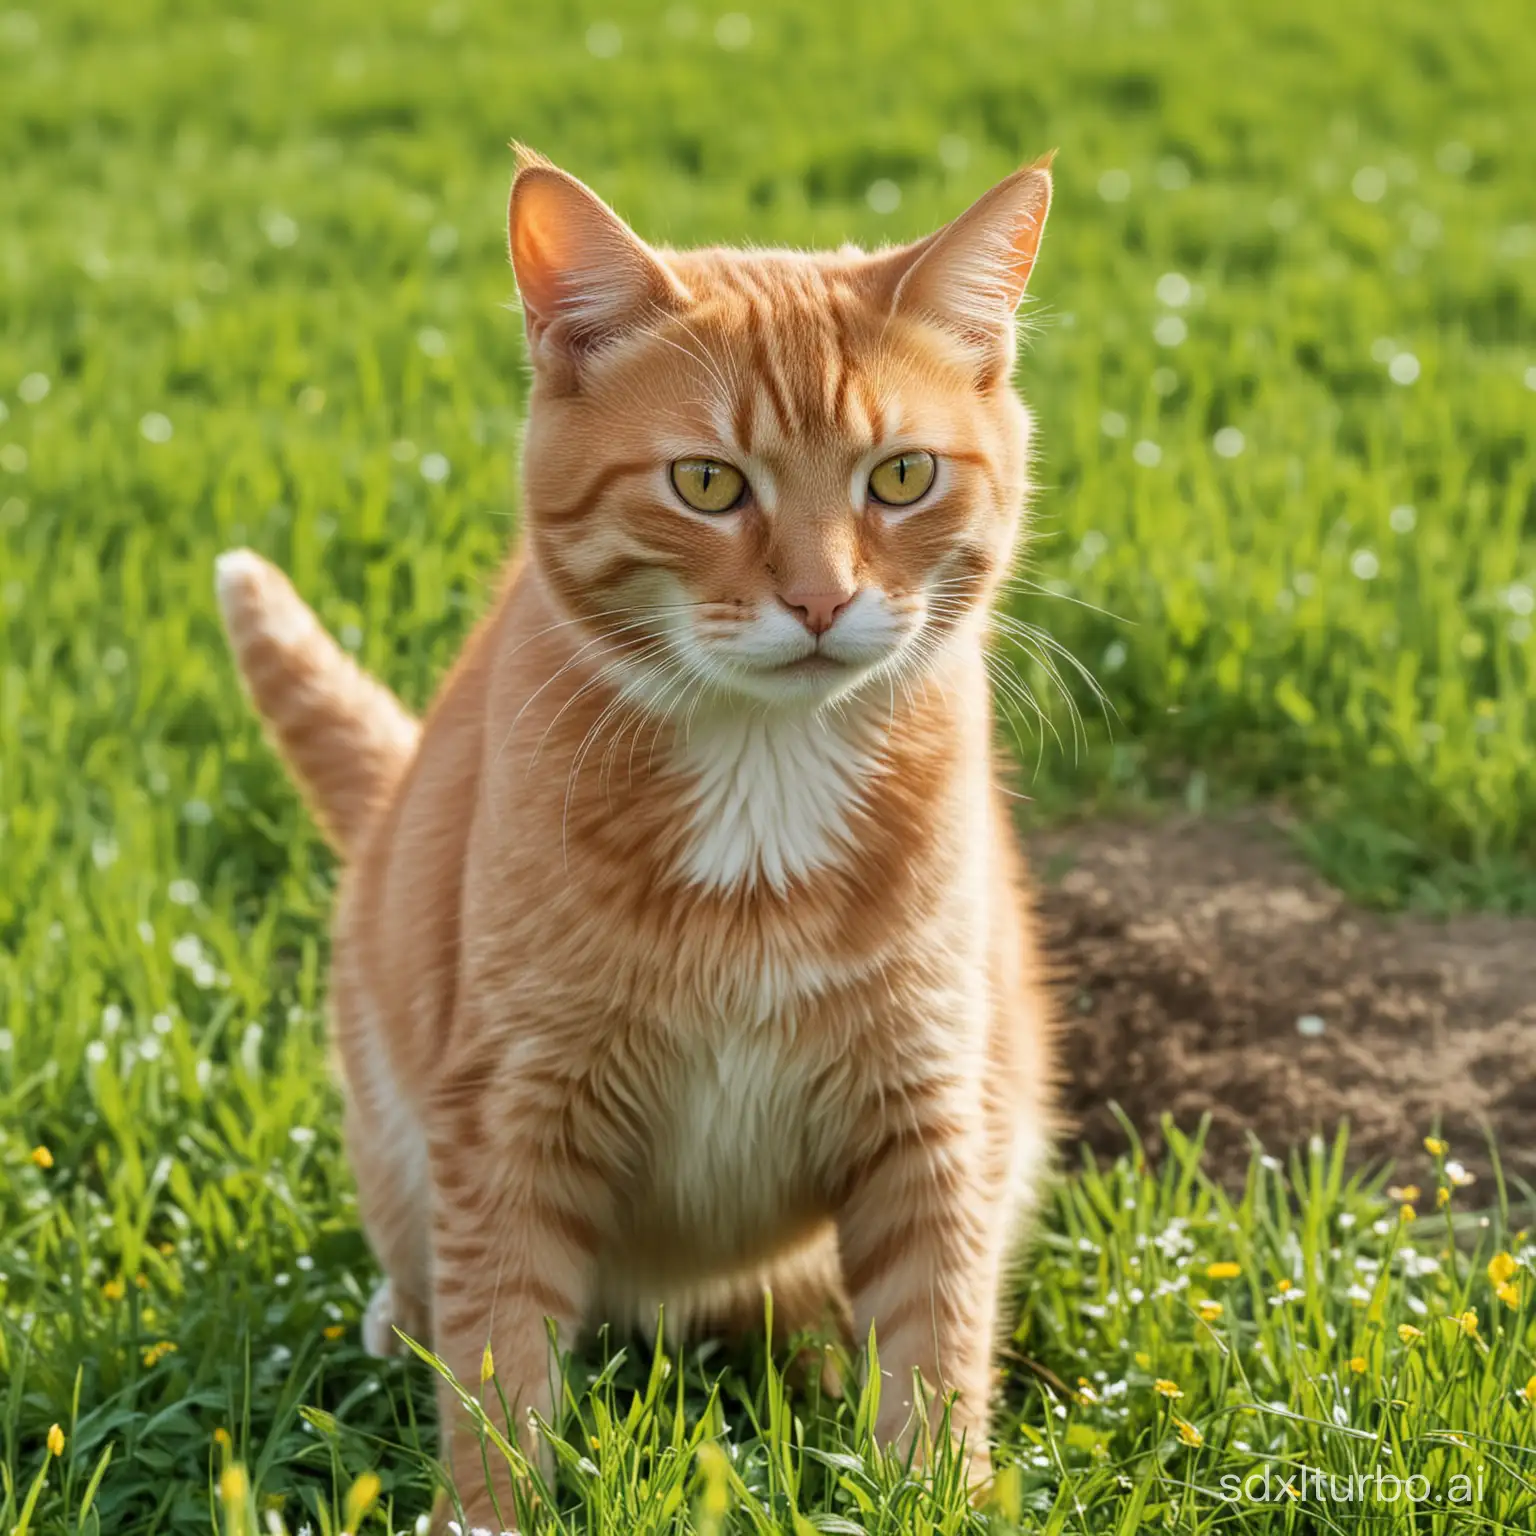 Playful-Ginger-Cat-Frolicking-in-Lush-Green-Field